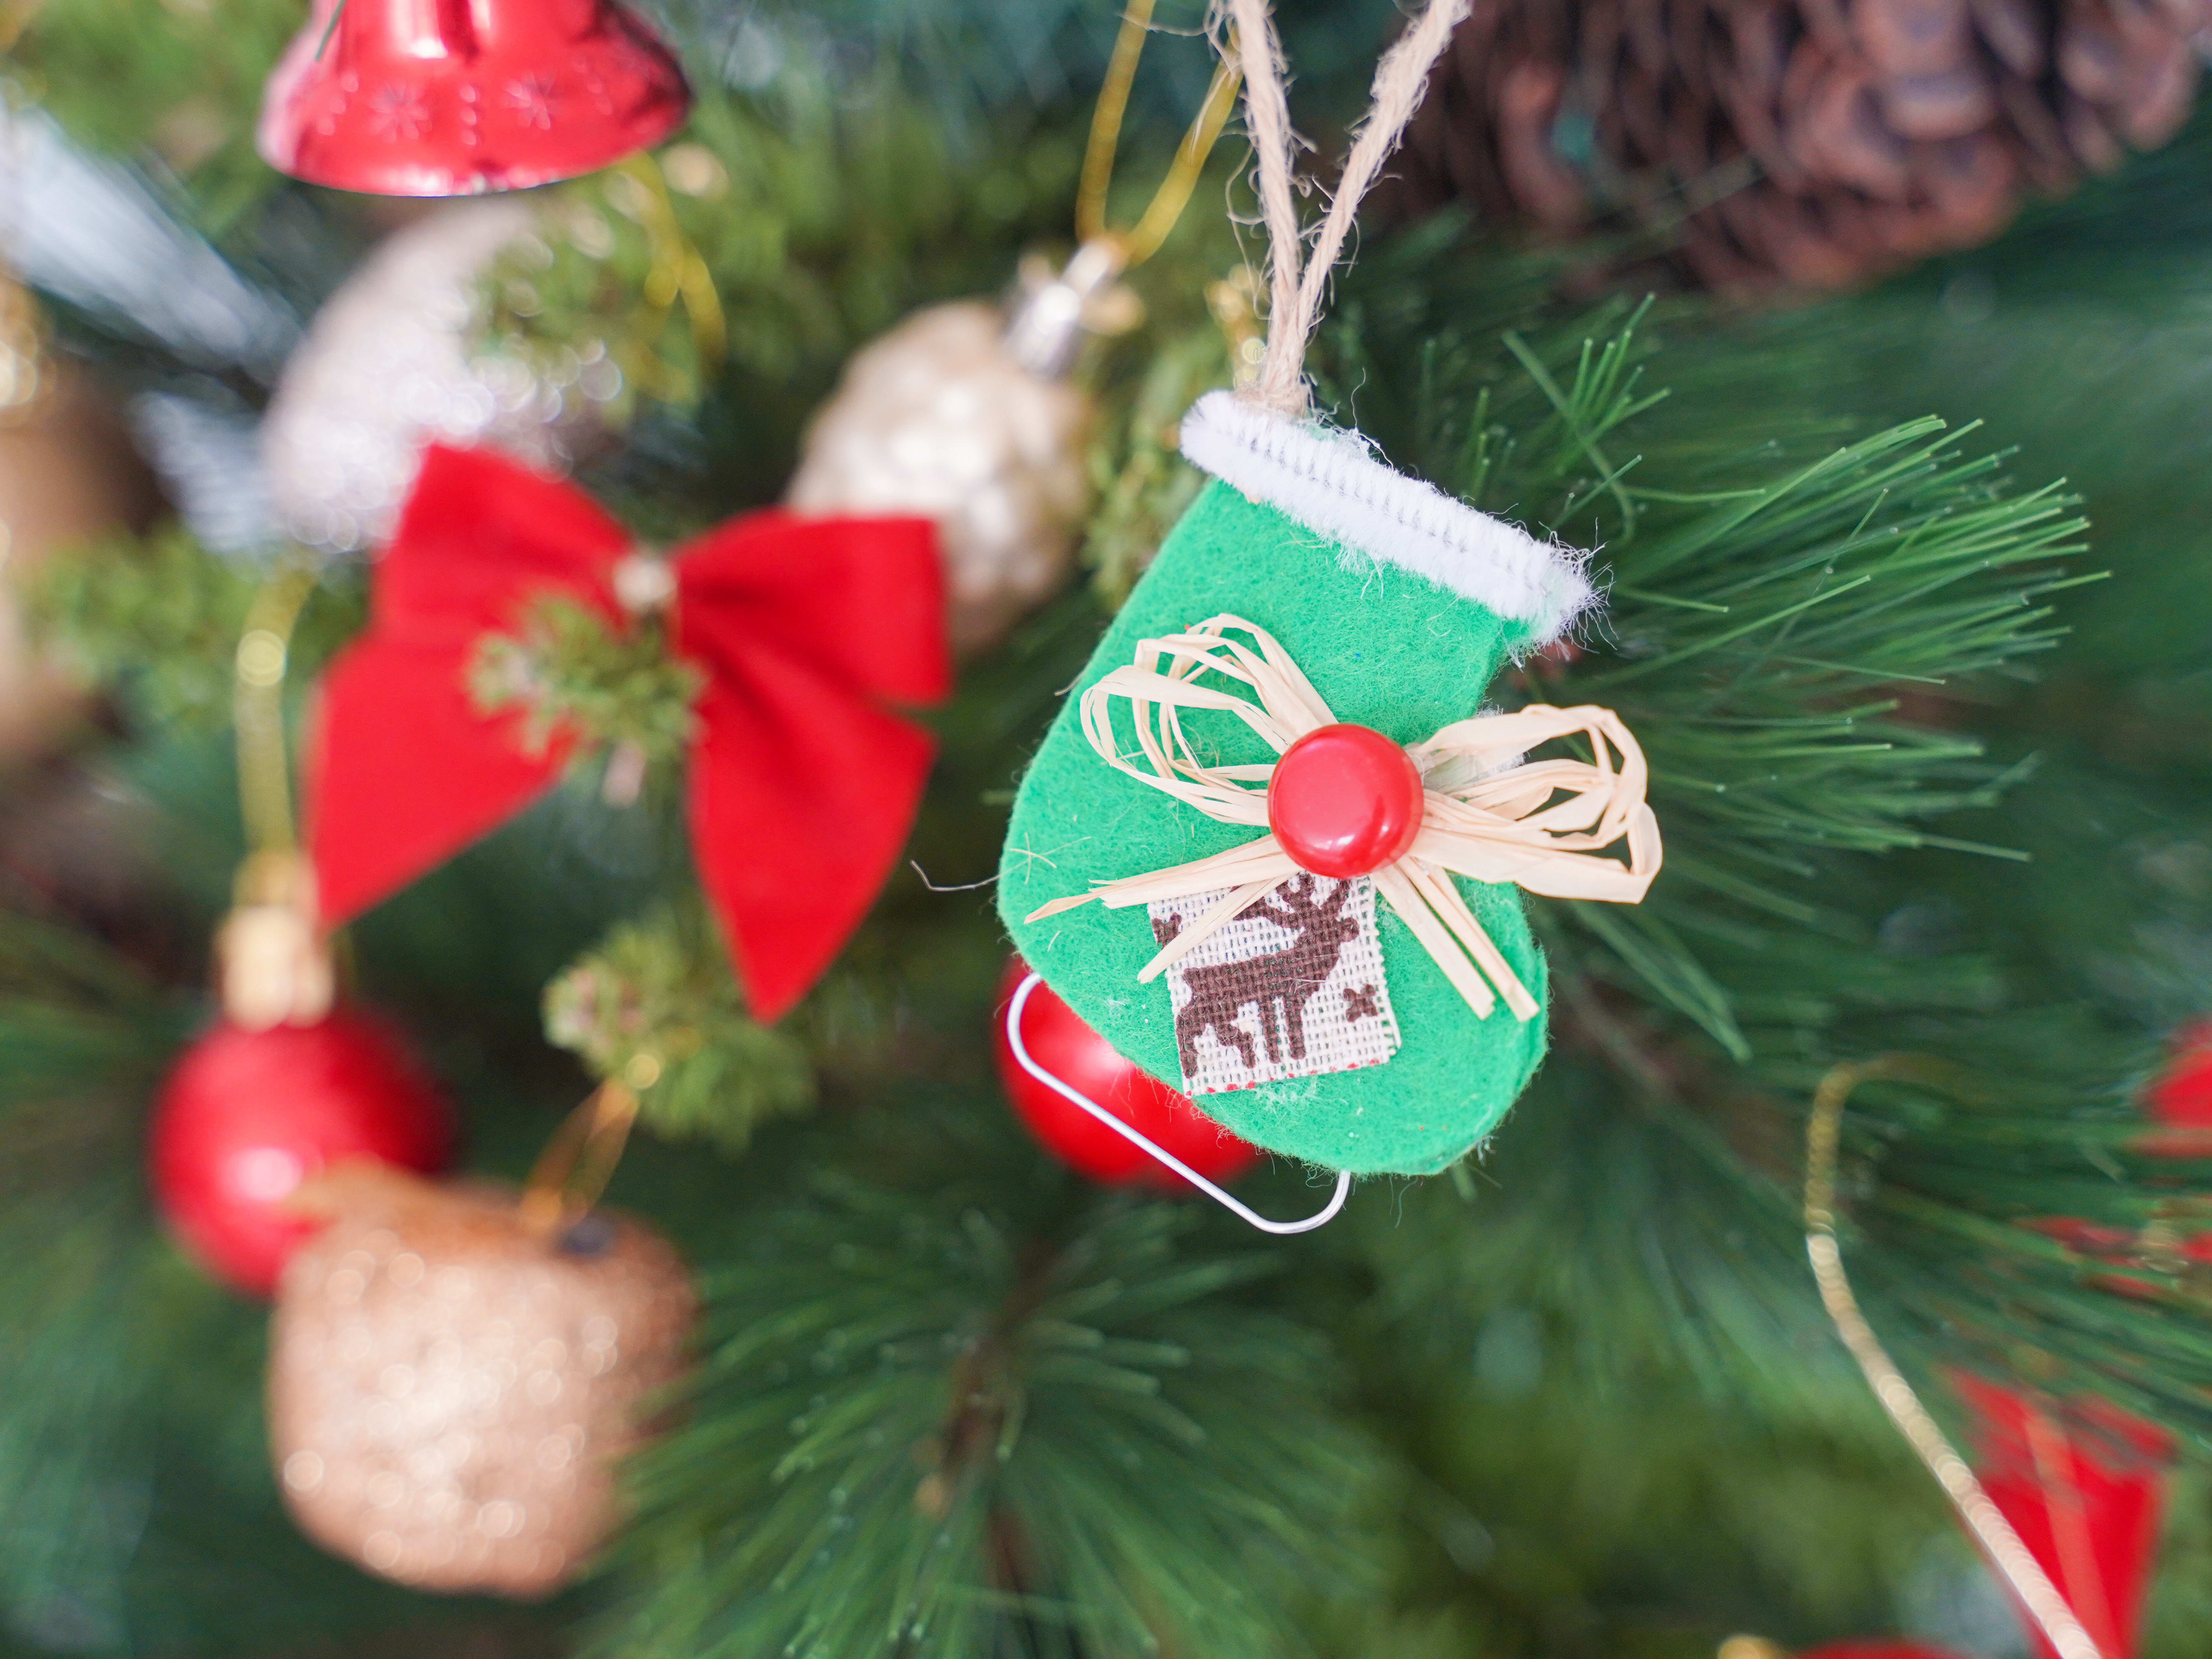 Glitter Foam Christmas Ornament Craft is an Easy Winter Project